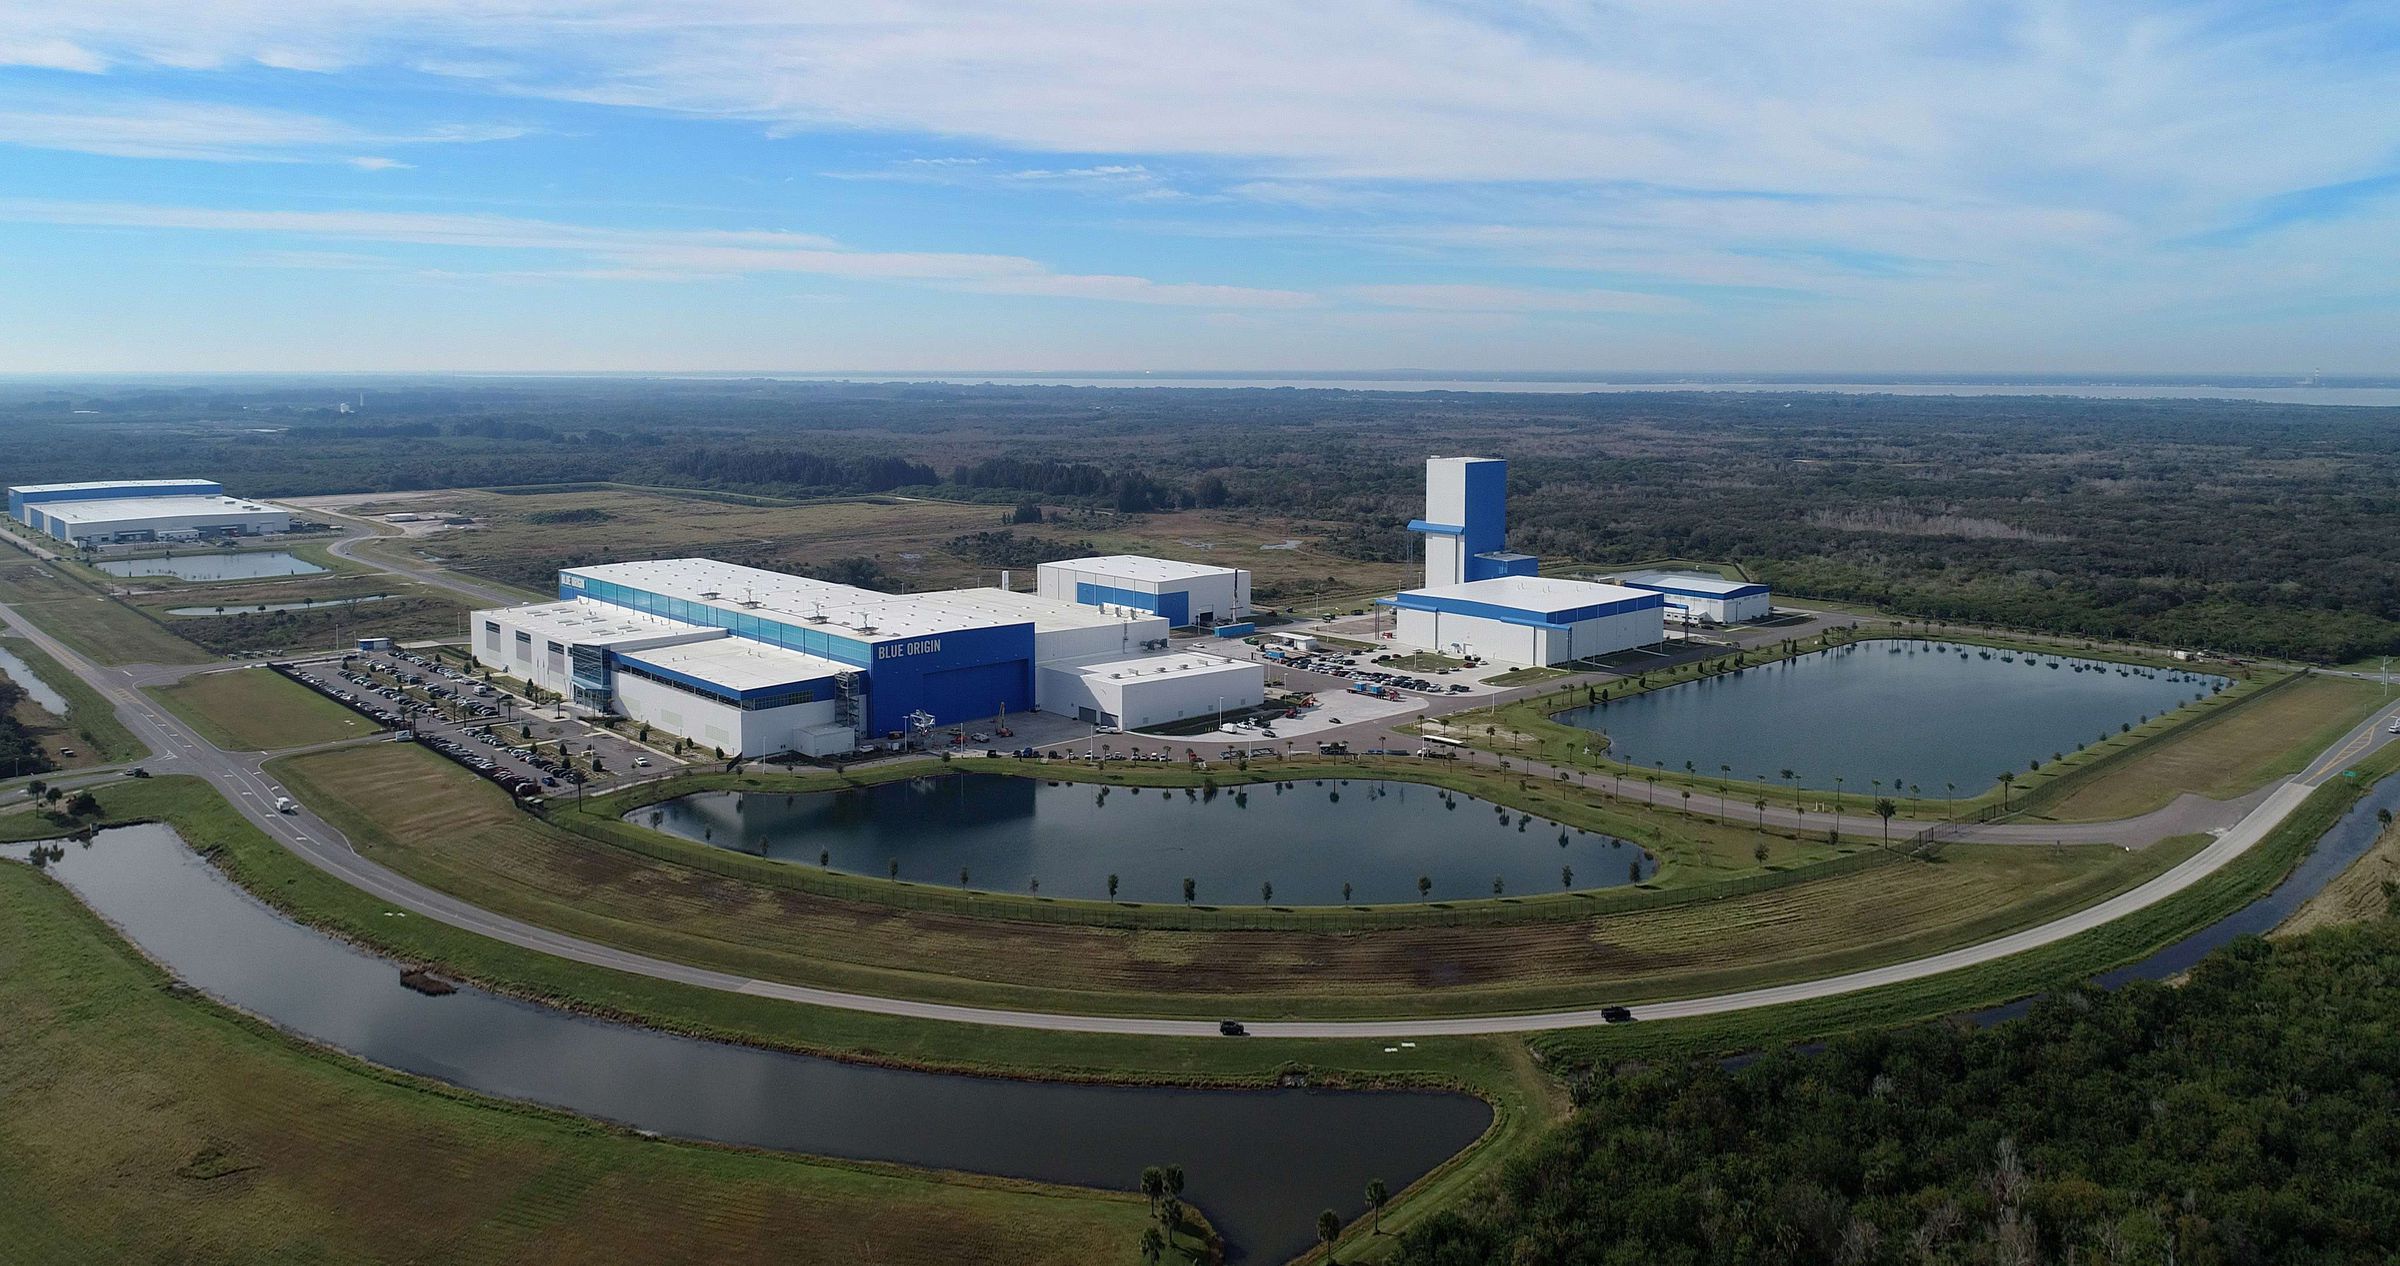 An aerial view of Blue Origin’s massive rocket factory in Florida, just outside the gates of NASA’s Kennedy Space Center.